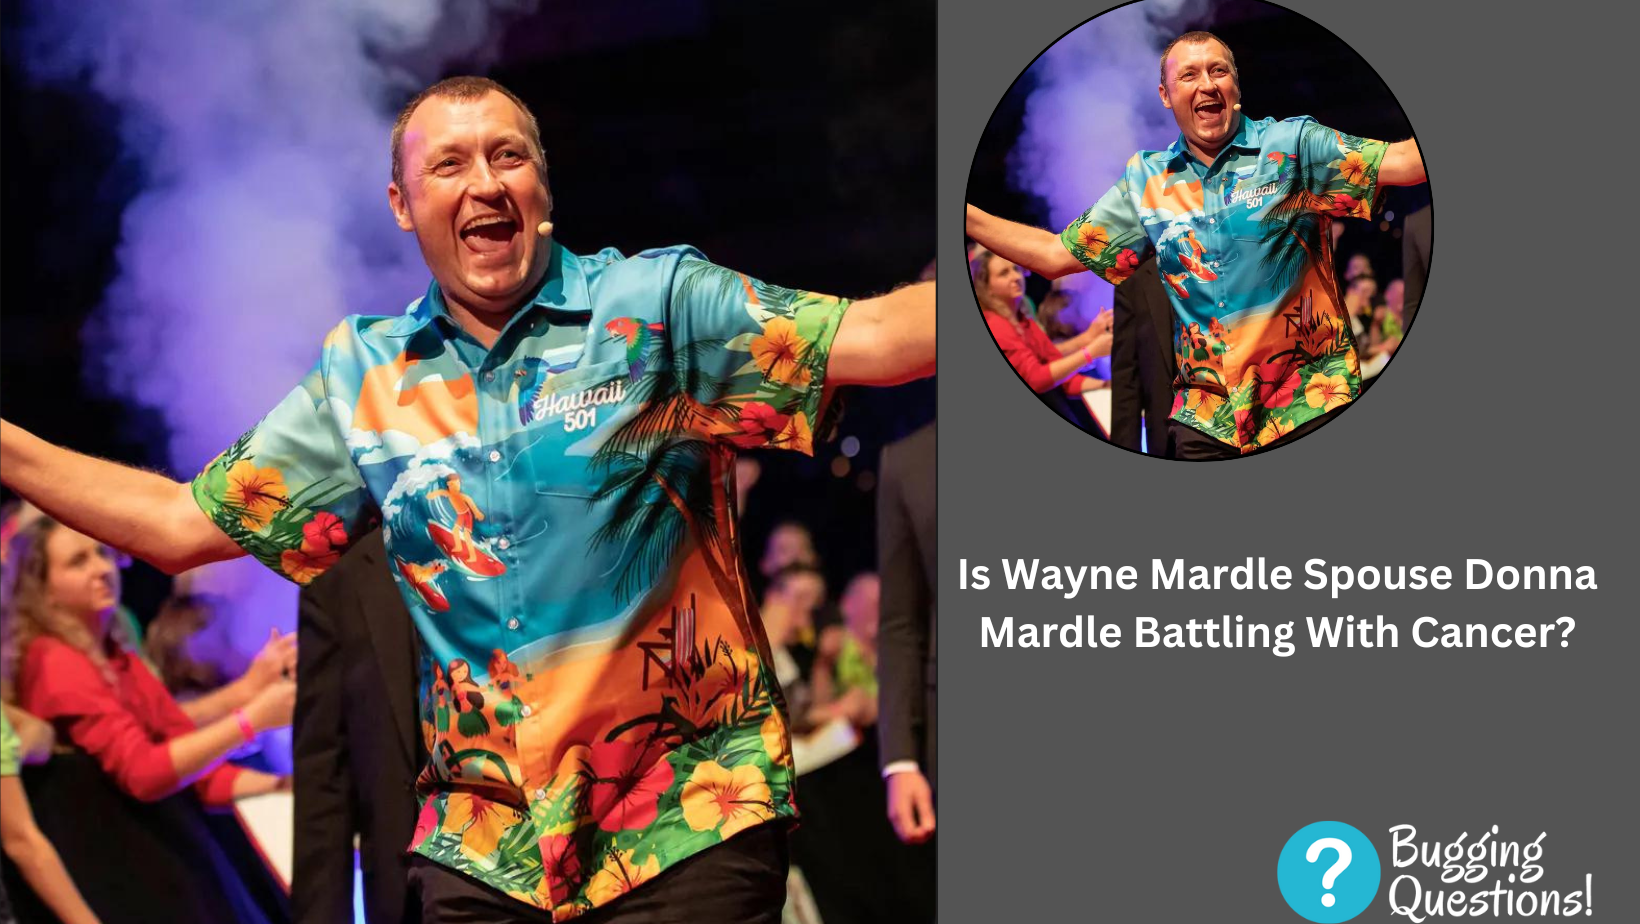 Is Wayne Mardle Spouse Donna Mardle Battling With Cancer?